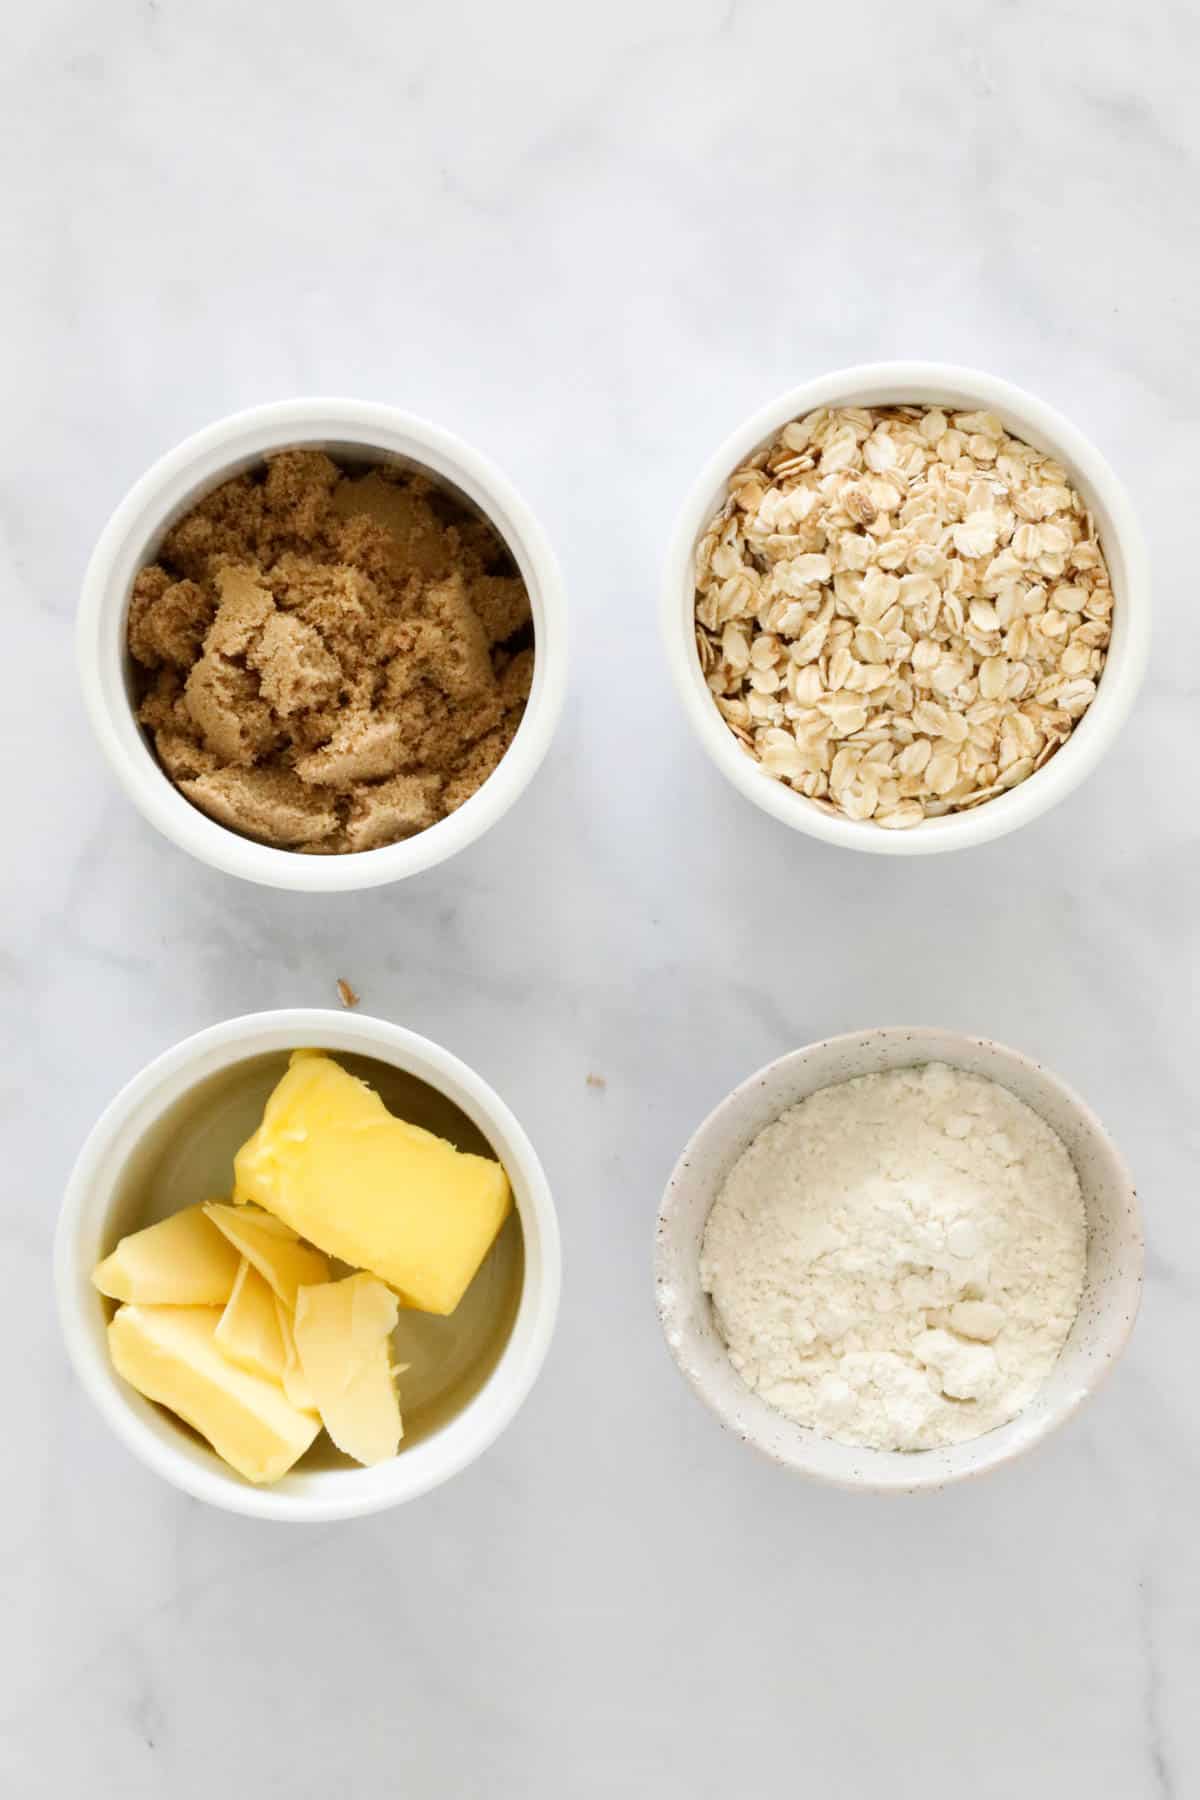 A bowl of brown sugar, a bowl of butter, a bowl of rolled oats, and a bowl of flour.